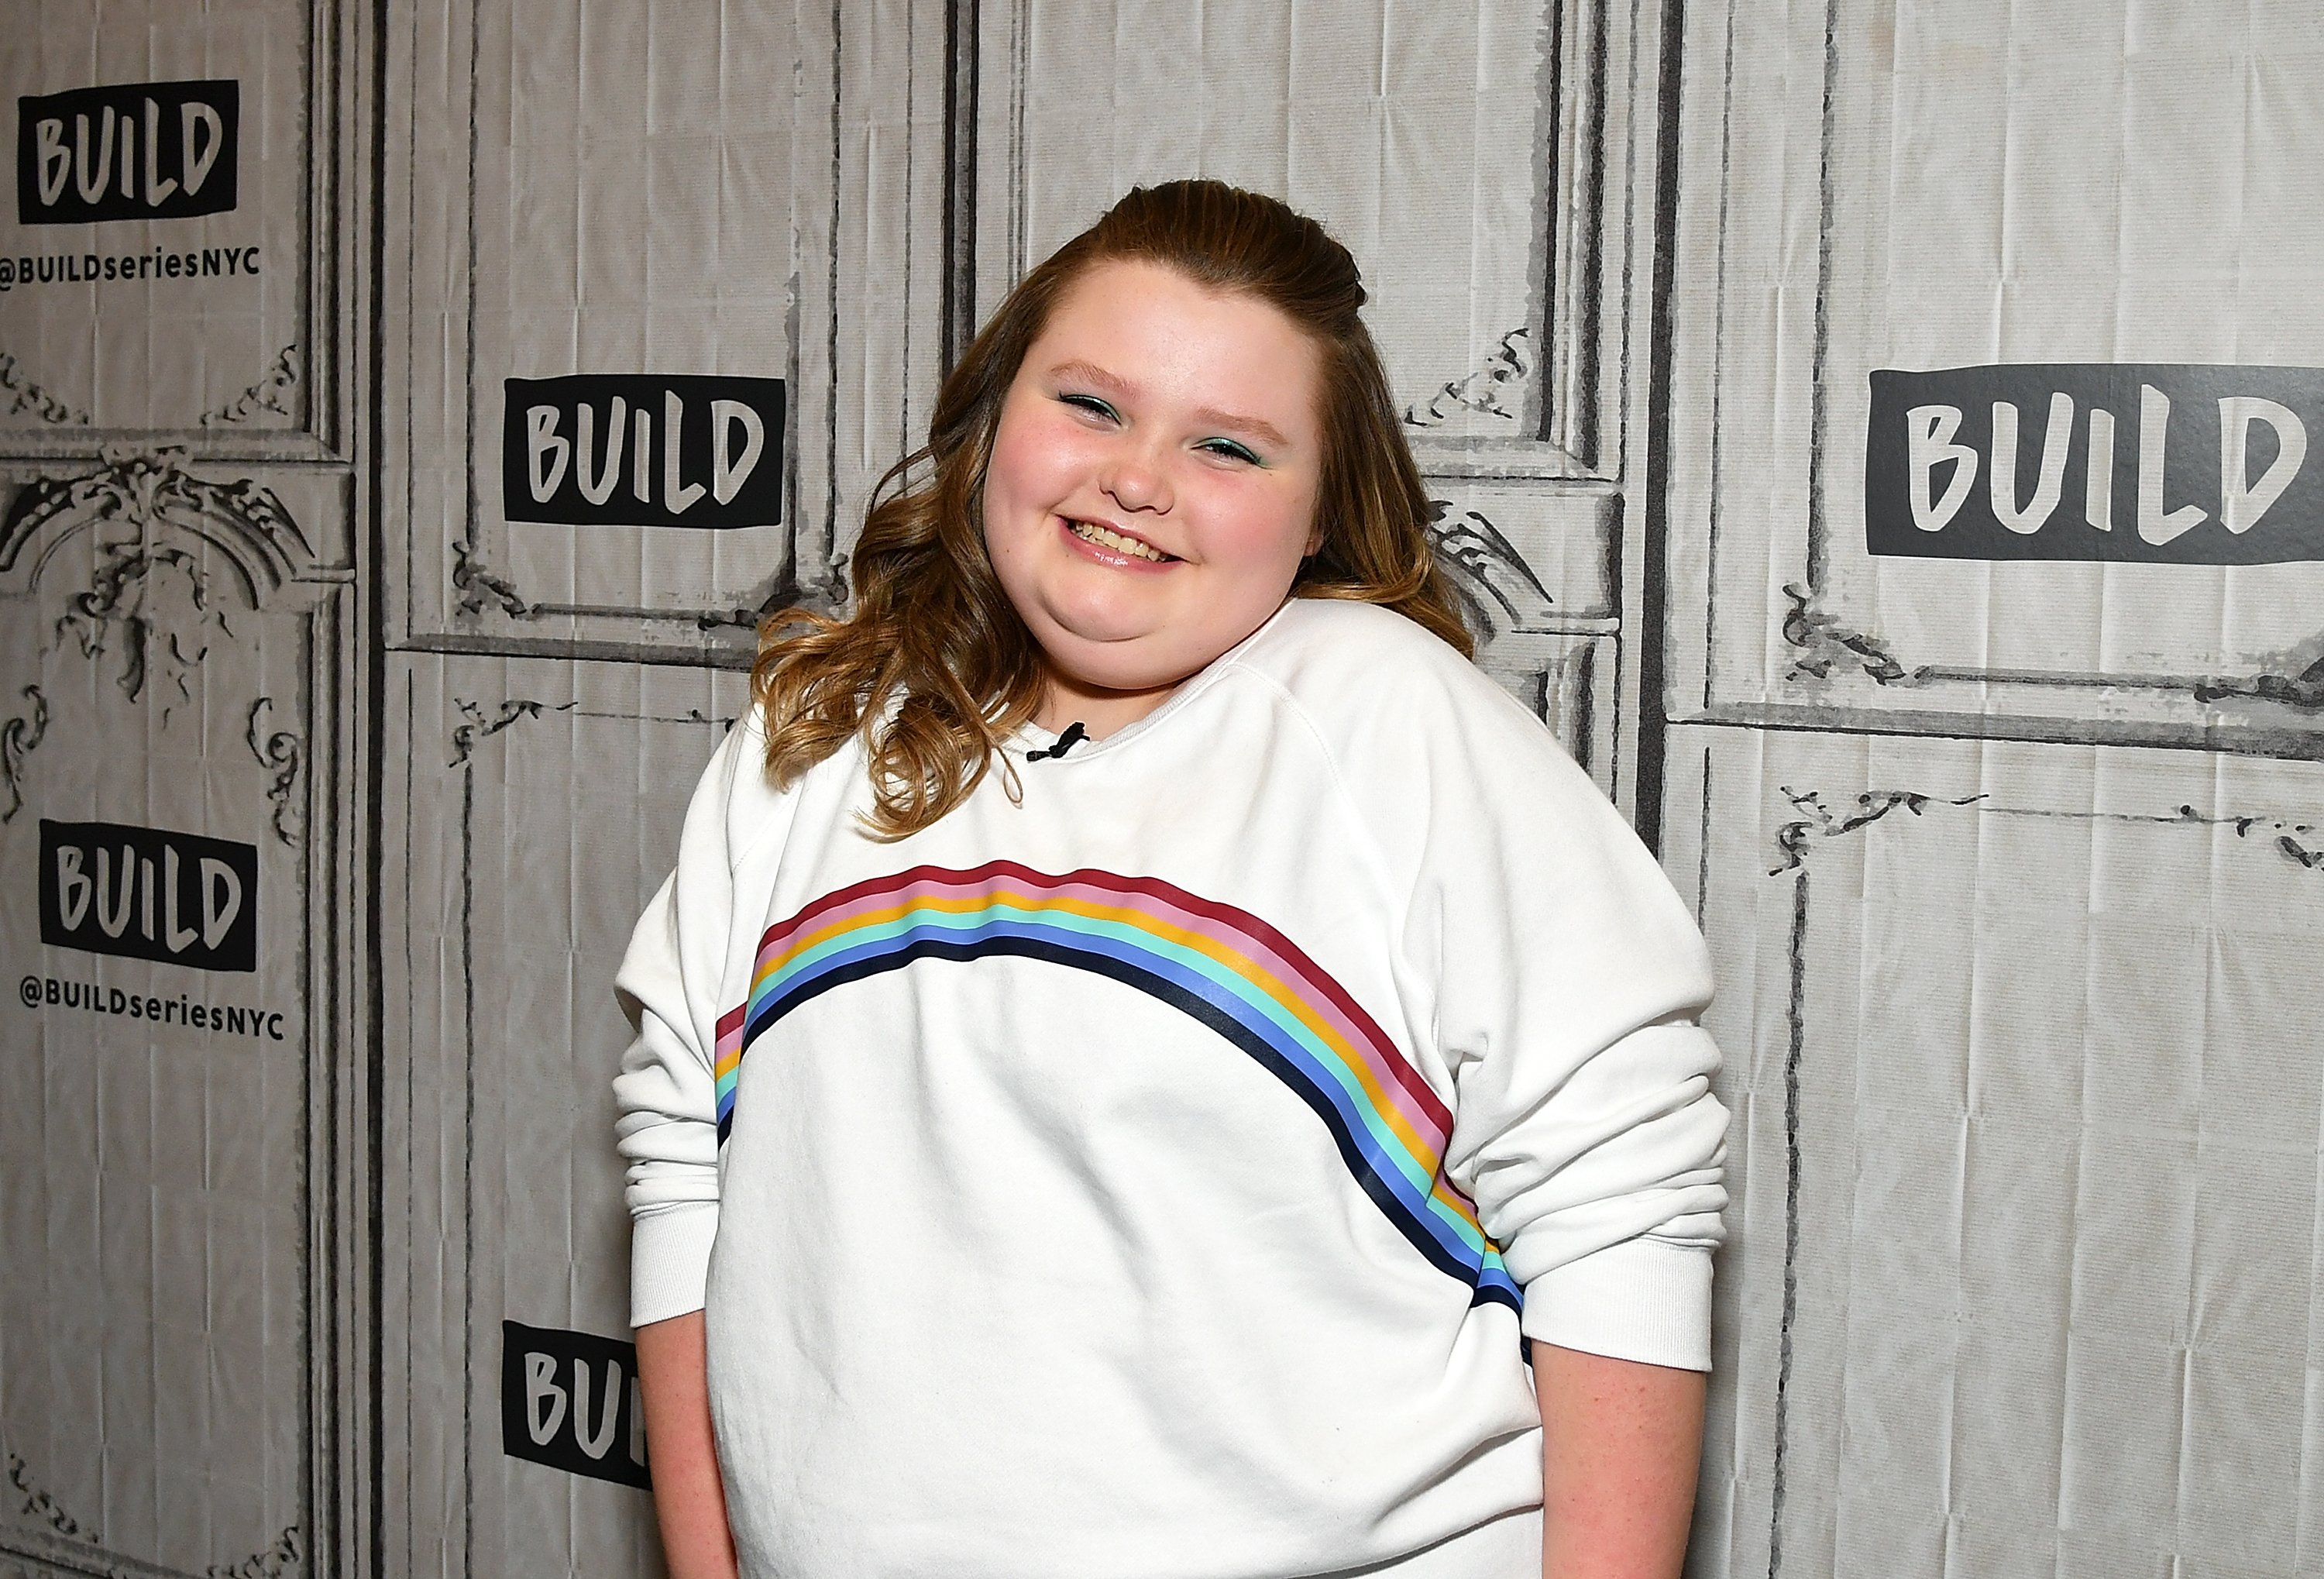 Alana "Honey Boo Boo" Thompson attends Build Brunch at Build Studio in New York City on March 14, 2019 | Photo: Getty Images